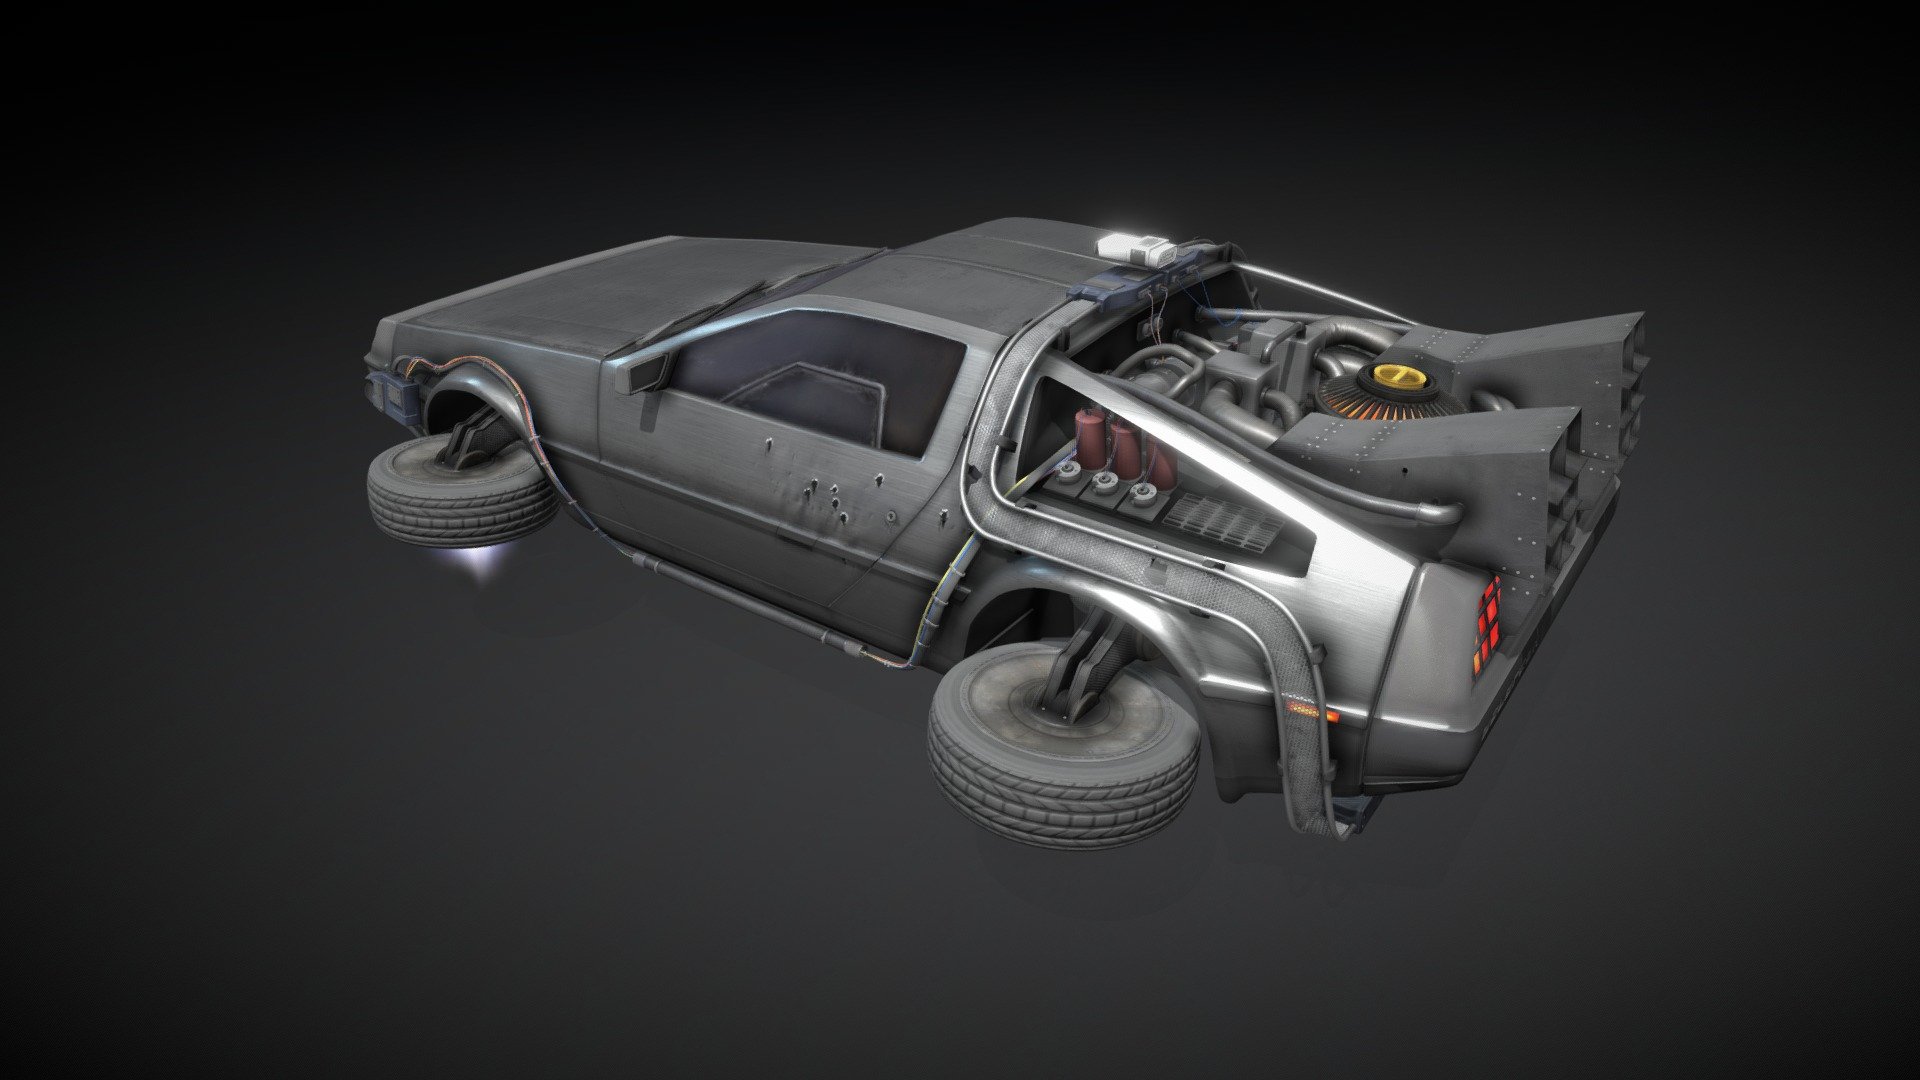 https://youtu.be/xJaUrlPoEa4

A couple of years ago I started a VR project with Jason Bradbury (UK TV Gadget host and Internet reviewer). I created the base Delorean DMC as a starting point, I then went on to create the Back To The Future movie additions.  It was a great project to work on as I was able to base my design on an actual real-world example of a Movie replica Car.

After watching Ready Player One I wanted to ‘update’ the model to reflect the changes made in the movie as they looked pretty cool on the big screen, who doesn’t want K.I.T.T additions on a Delorean anyhow?

I took the base DeLorean model and some of the BTTF additions I have already added and went all out on the detail, motivated by the amazing Ready Player one visuals.  Some of the obvious changes included the ‘Parzival’ license plate, the original 2.21 Giggawatts generator present at the same time as Hover mode and the broken time mesh and wing mirror…

3DMax
Photoshop 

Here's to over 4K follow Sketchfab Followers! - Ready Player One - Parzival's Delorean - Buy Royalty Free 3D model by JCulley3D (@jamesculley) 3d model